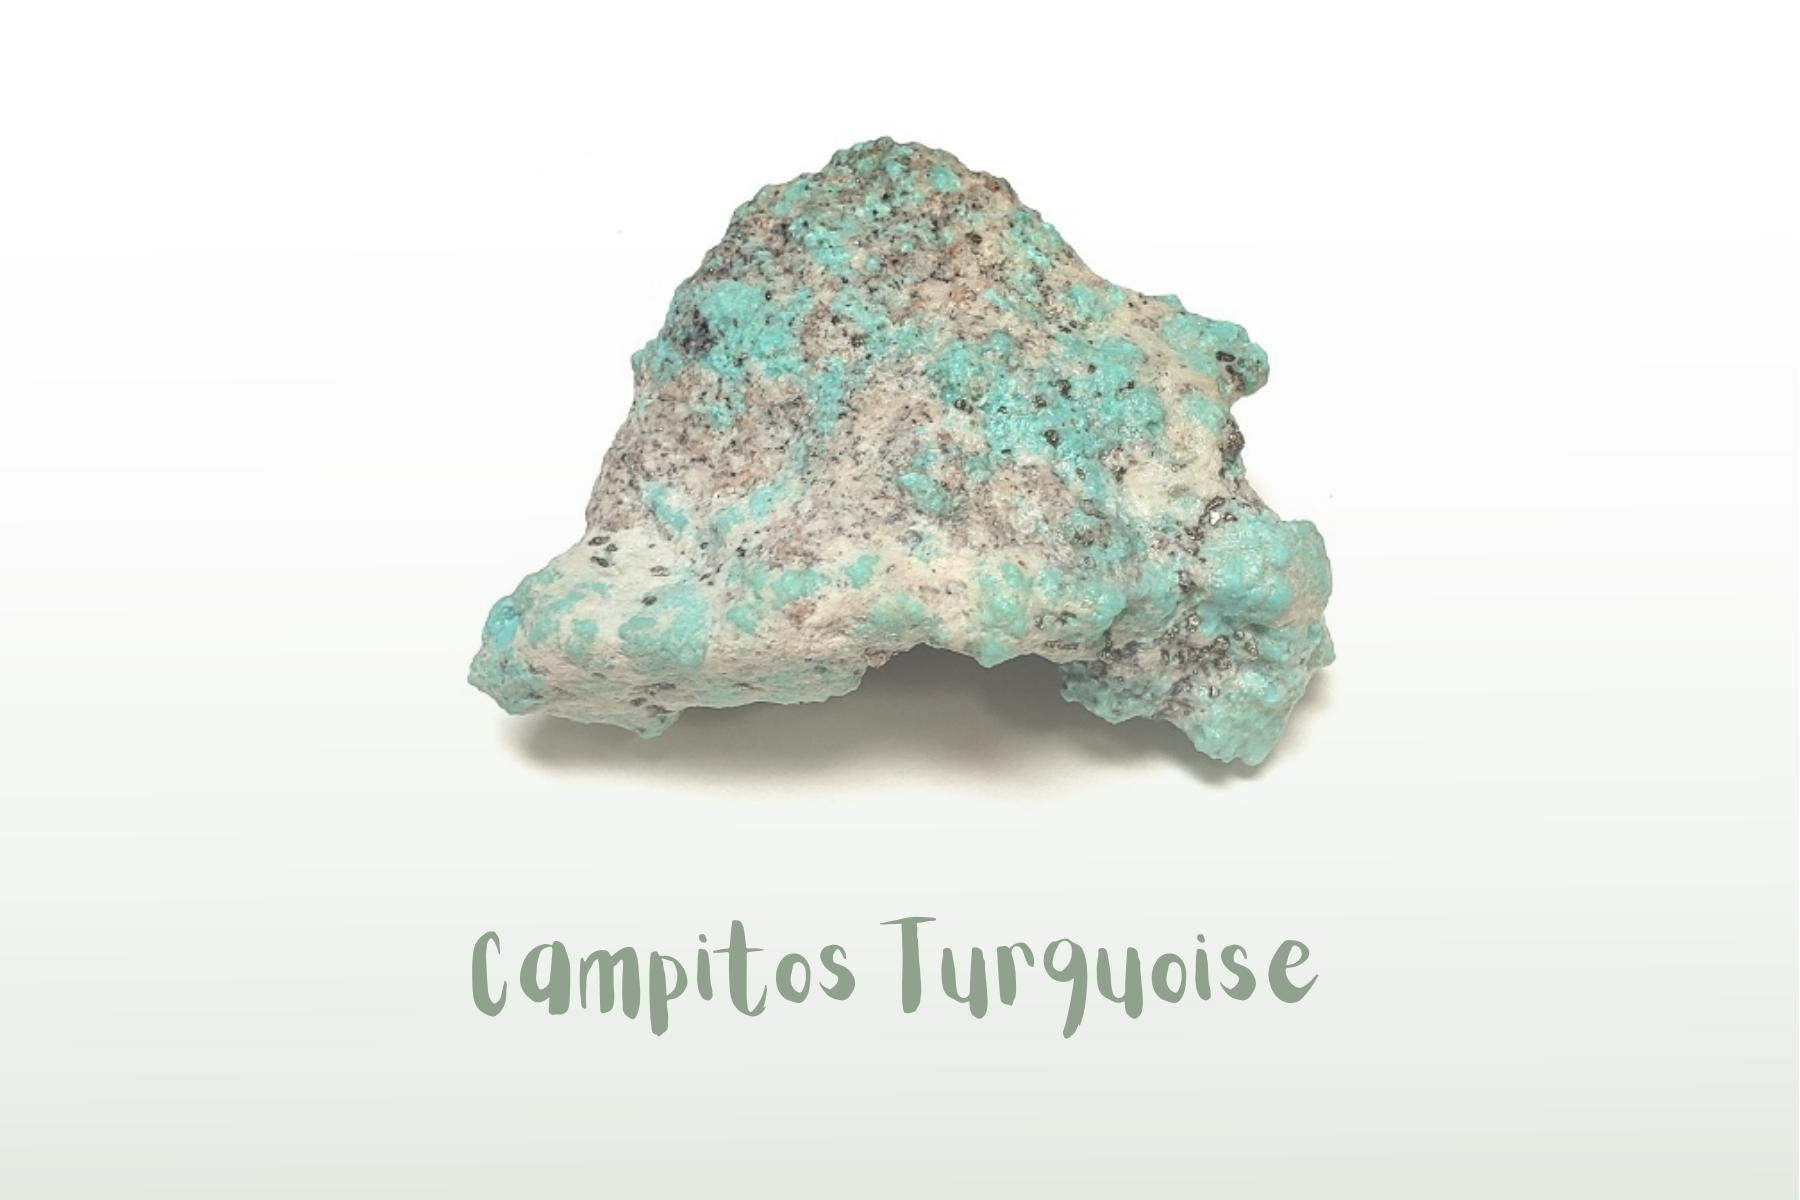 A campitos turquoise rock with sky blue and gray shades